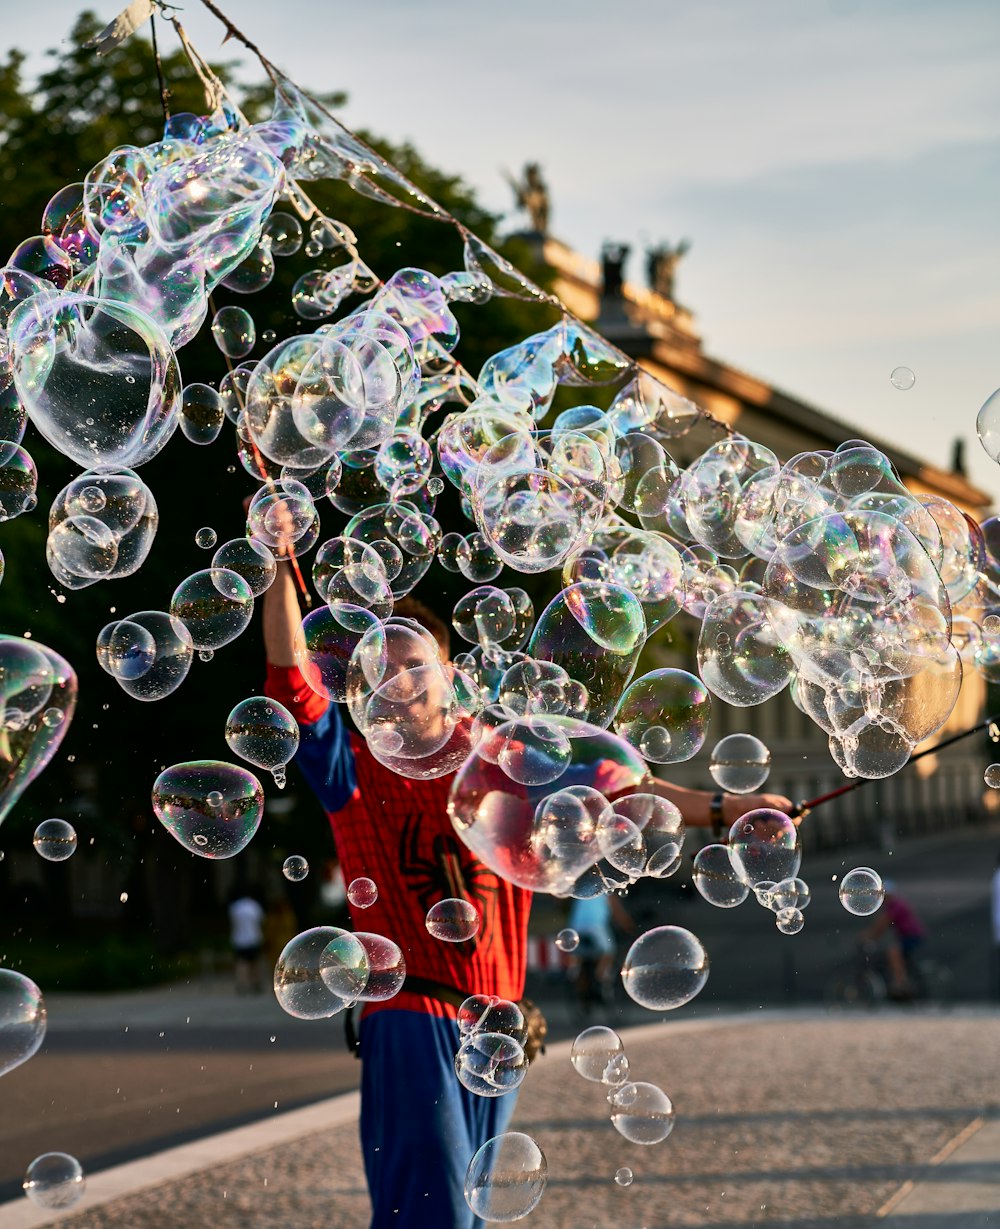 a young boy is playing with soap bubbles